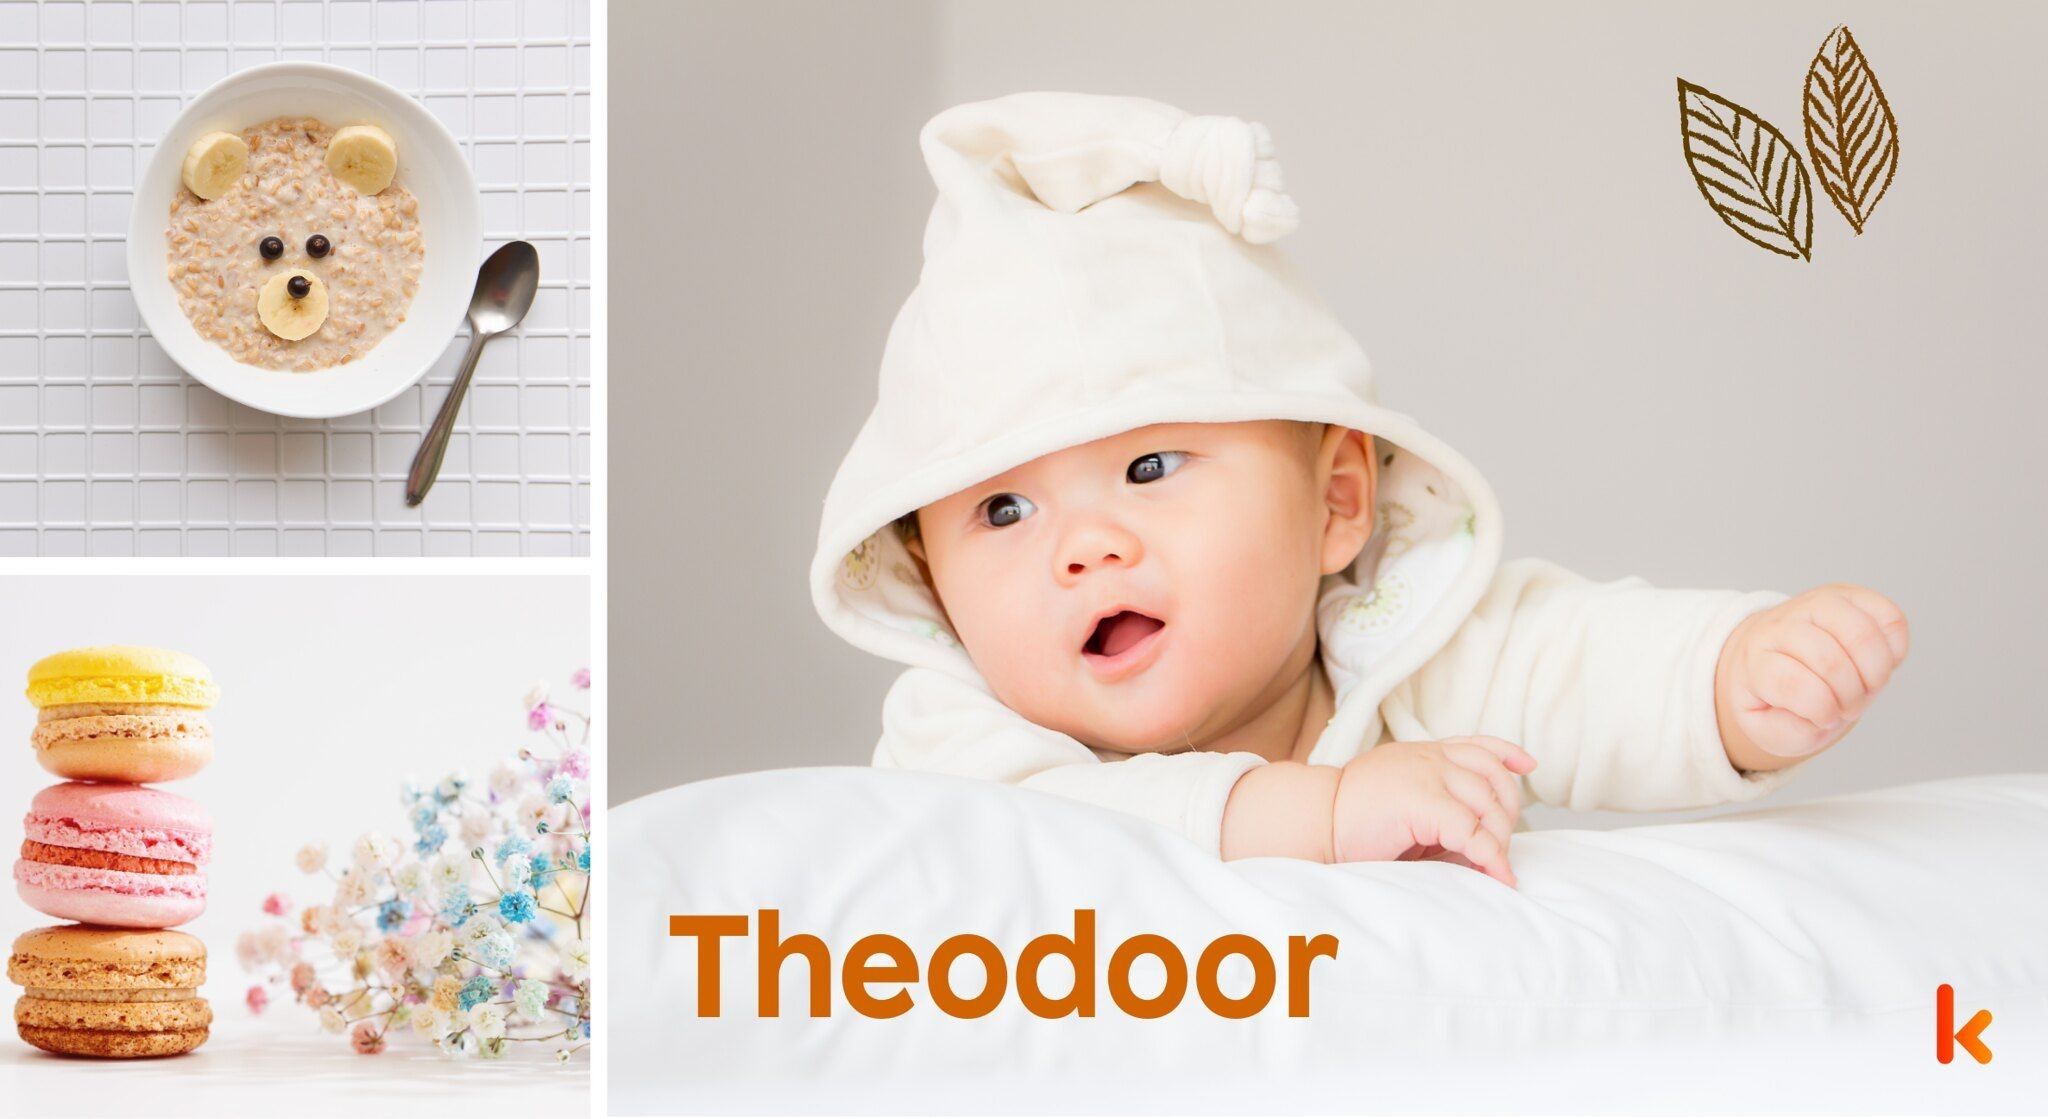 Meaning of the name Theodoor